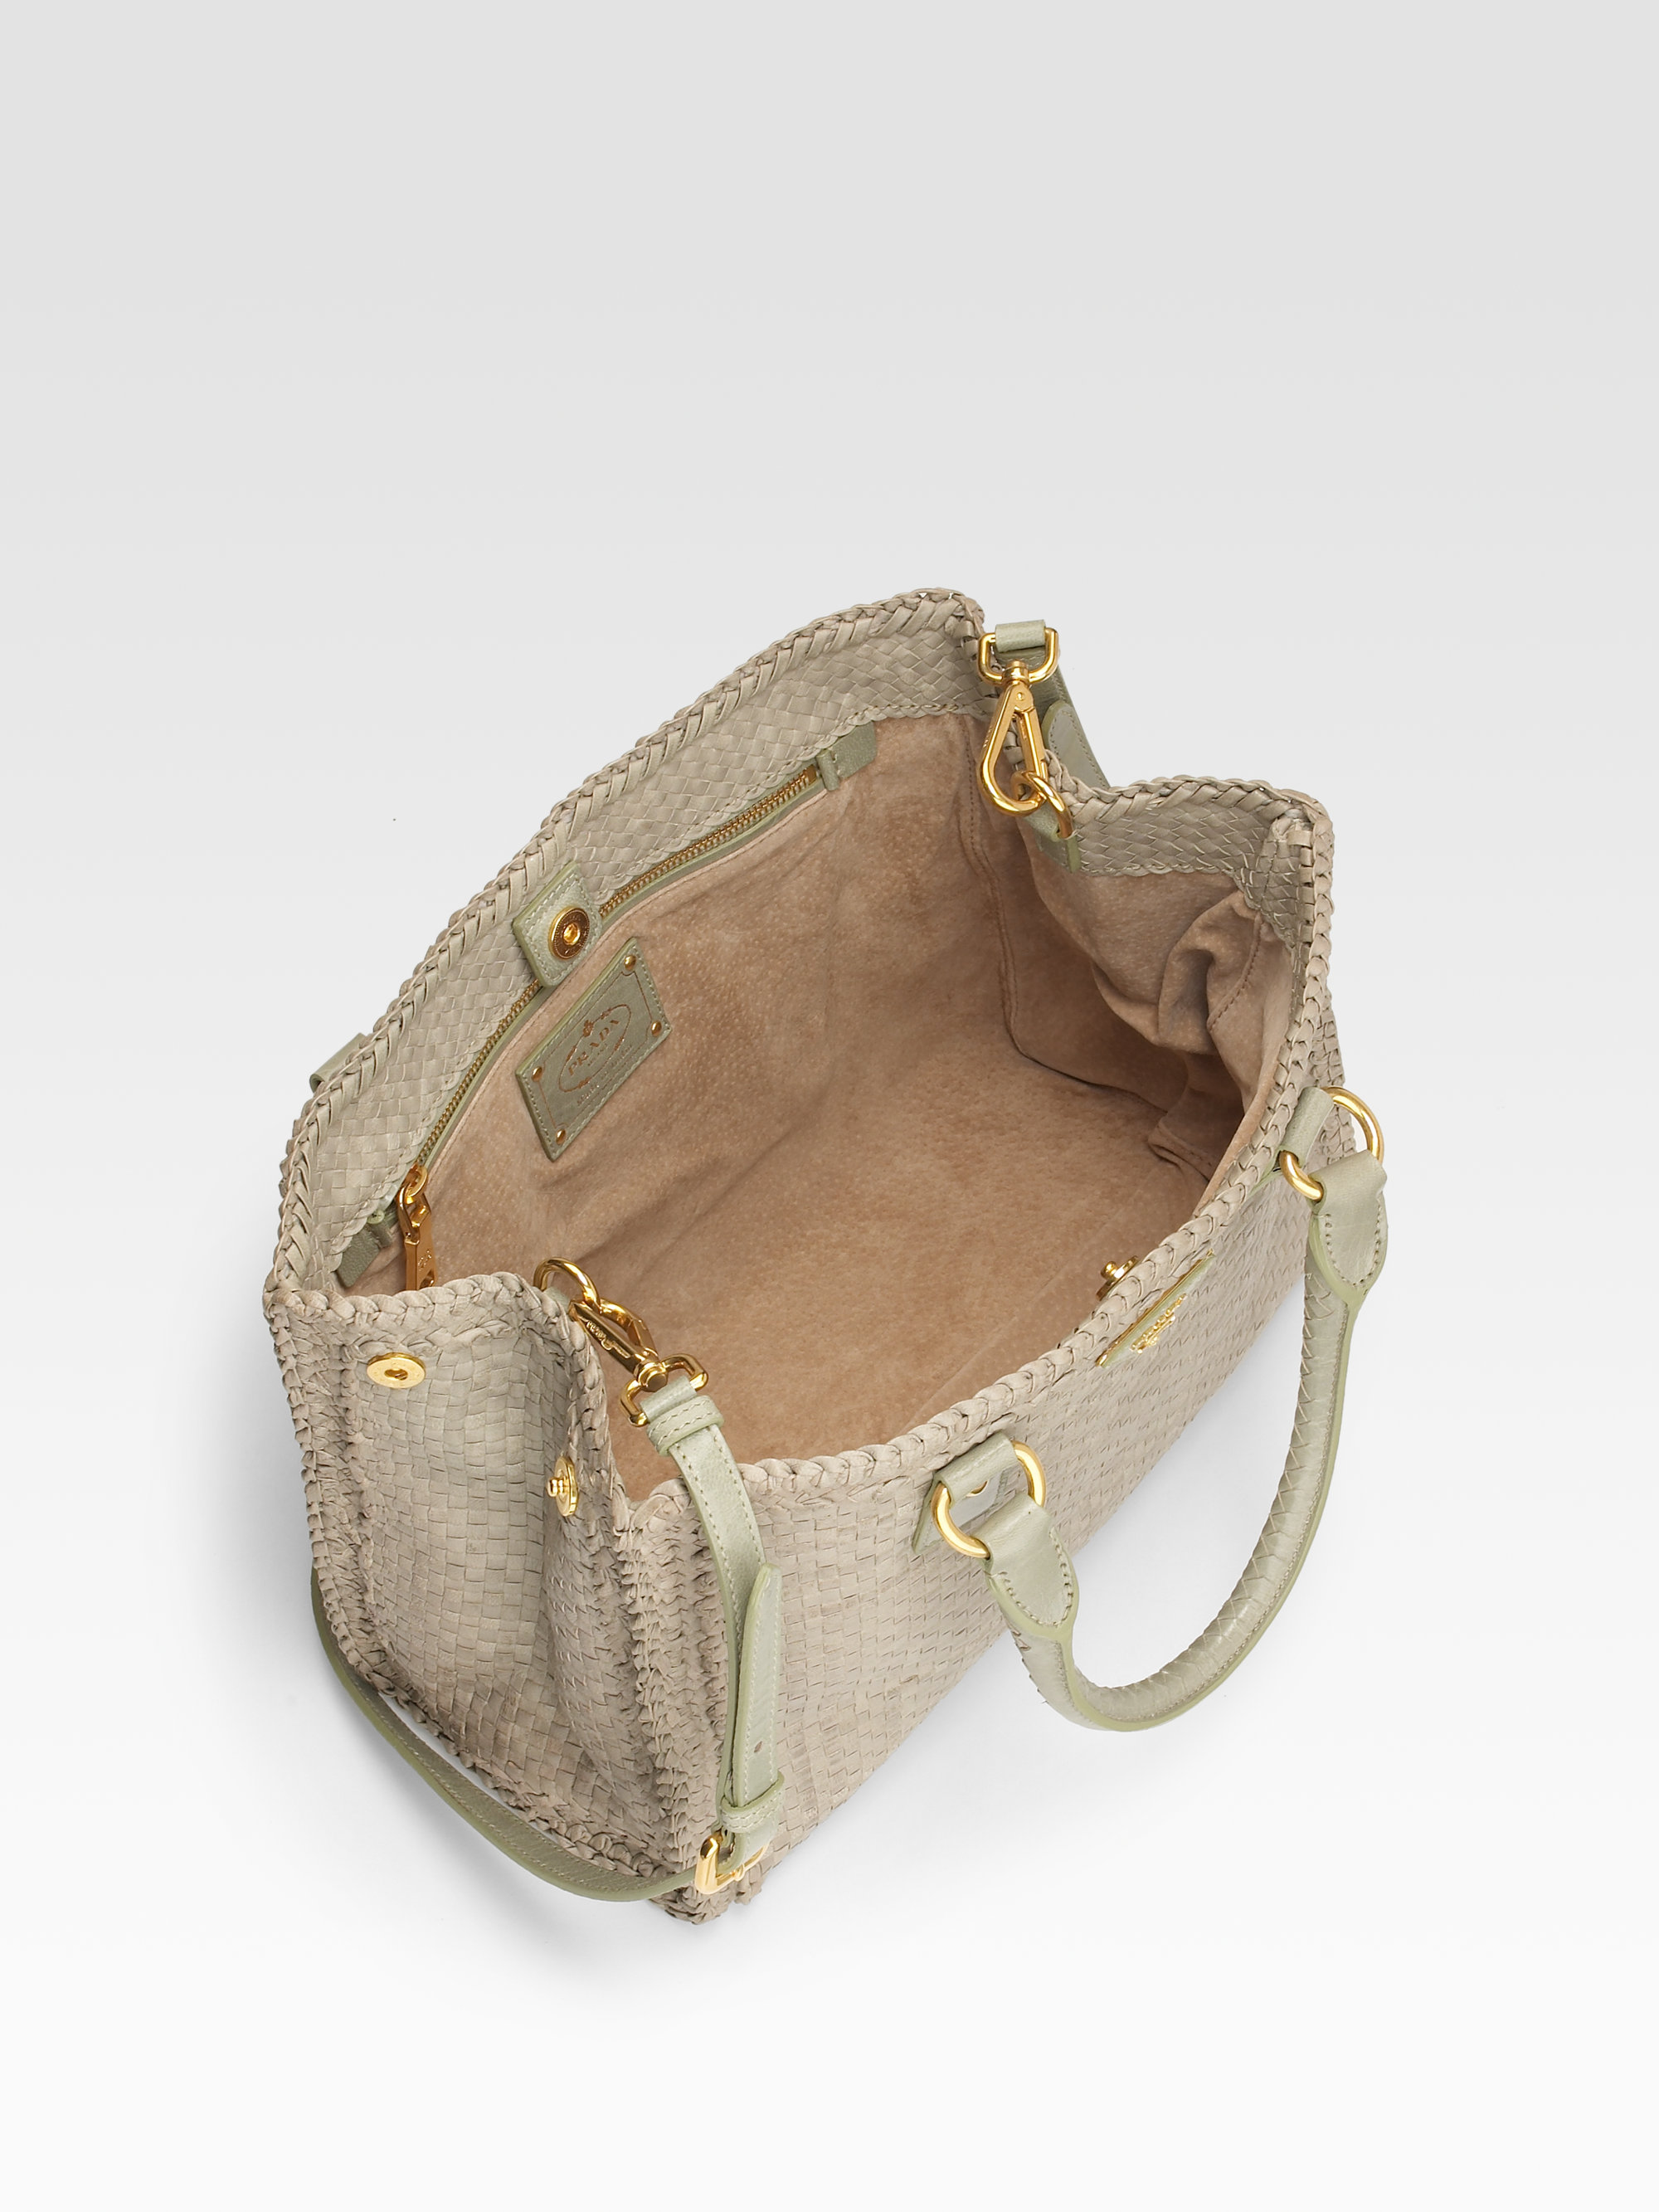 Prada Madras Double Handle Small Tote Bag in Beige | Lyst